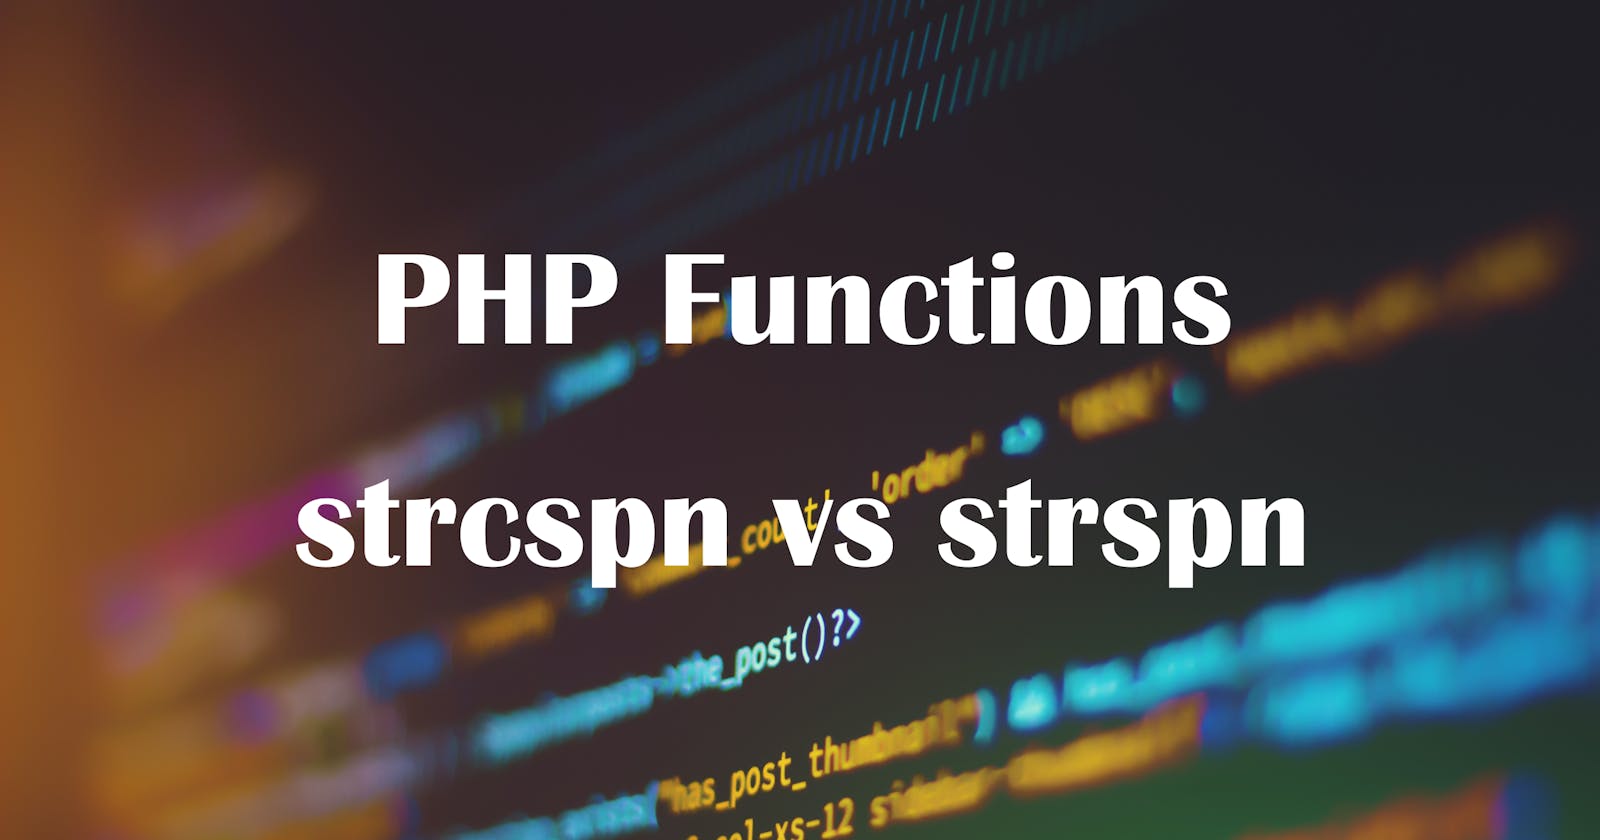 PHP functions strcspn() and strspn()